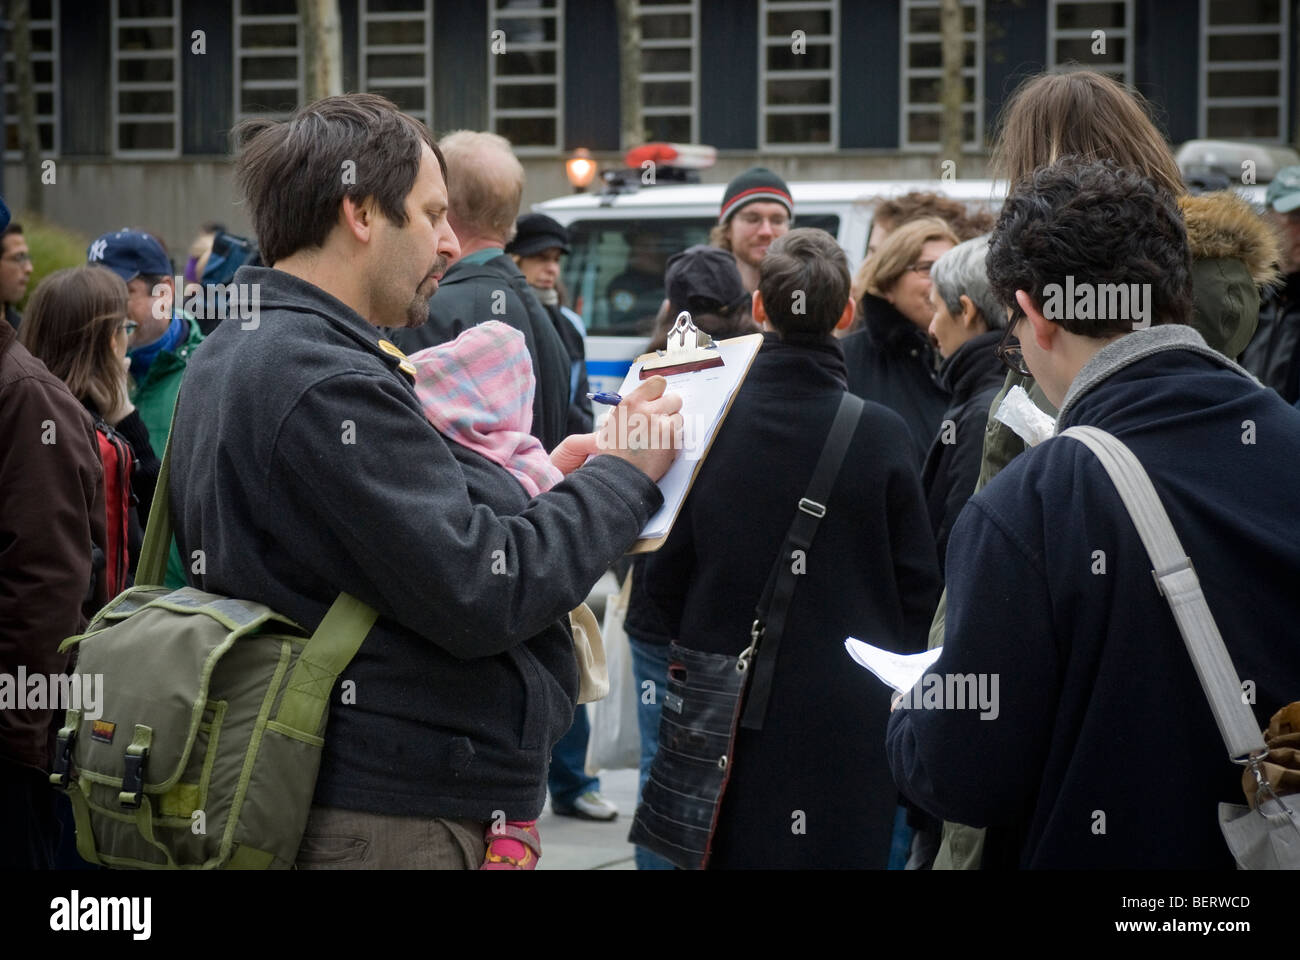 A volunteer, right, collects signatures on a petition in Brooklyn in New York Stock Photo